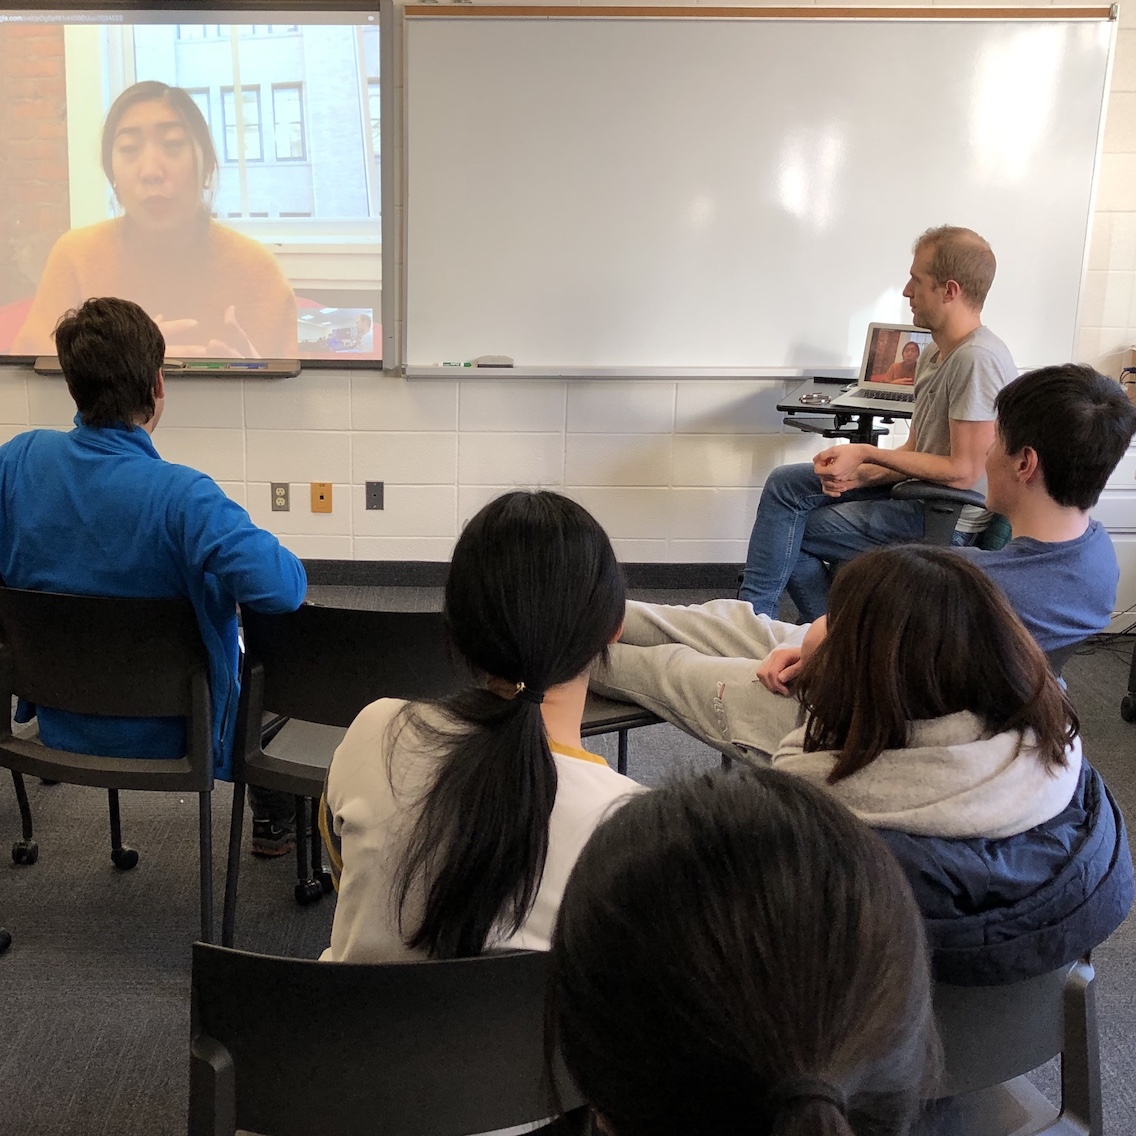 A young woman takes part in a video chat with current high school students.